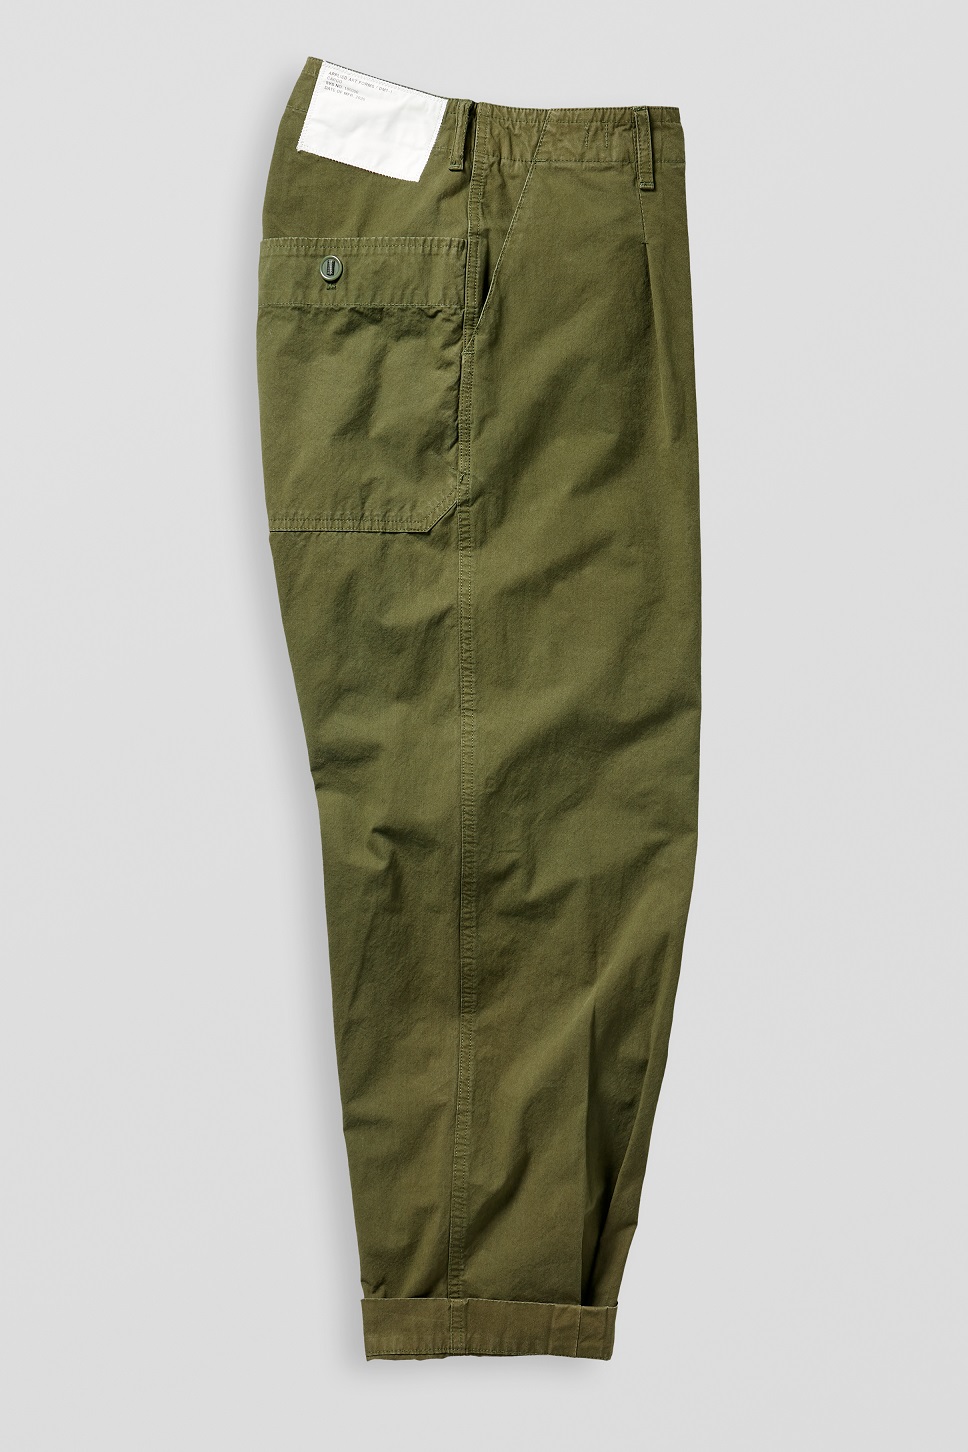 APPLIED ART FORMS Japanese Cargo Pant in Military Green M